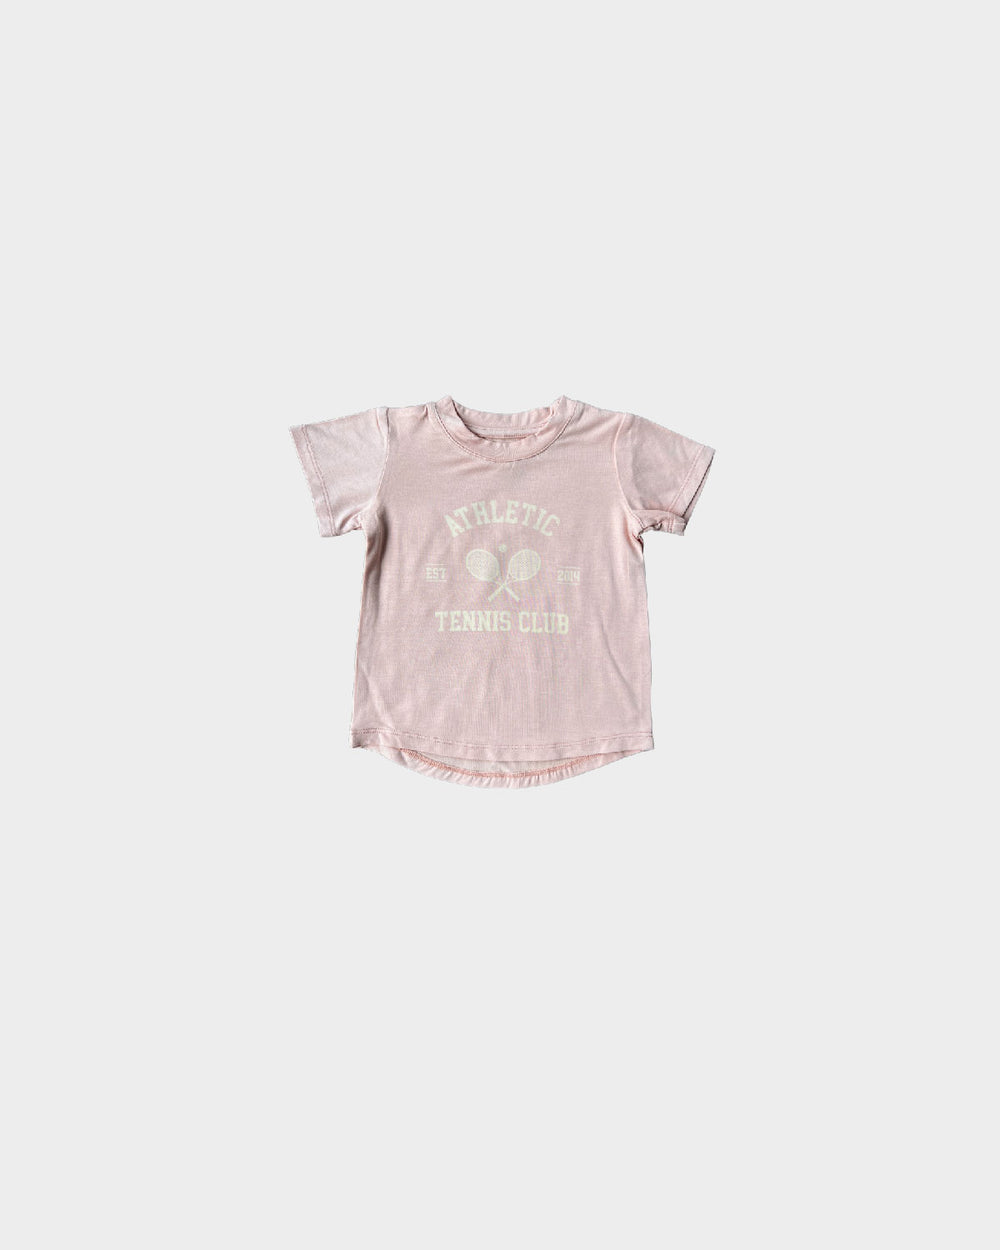 modern + cozy kids apparel – babysprouts clothing company